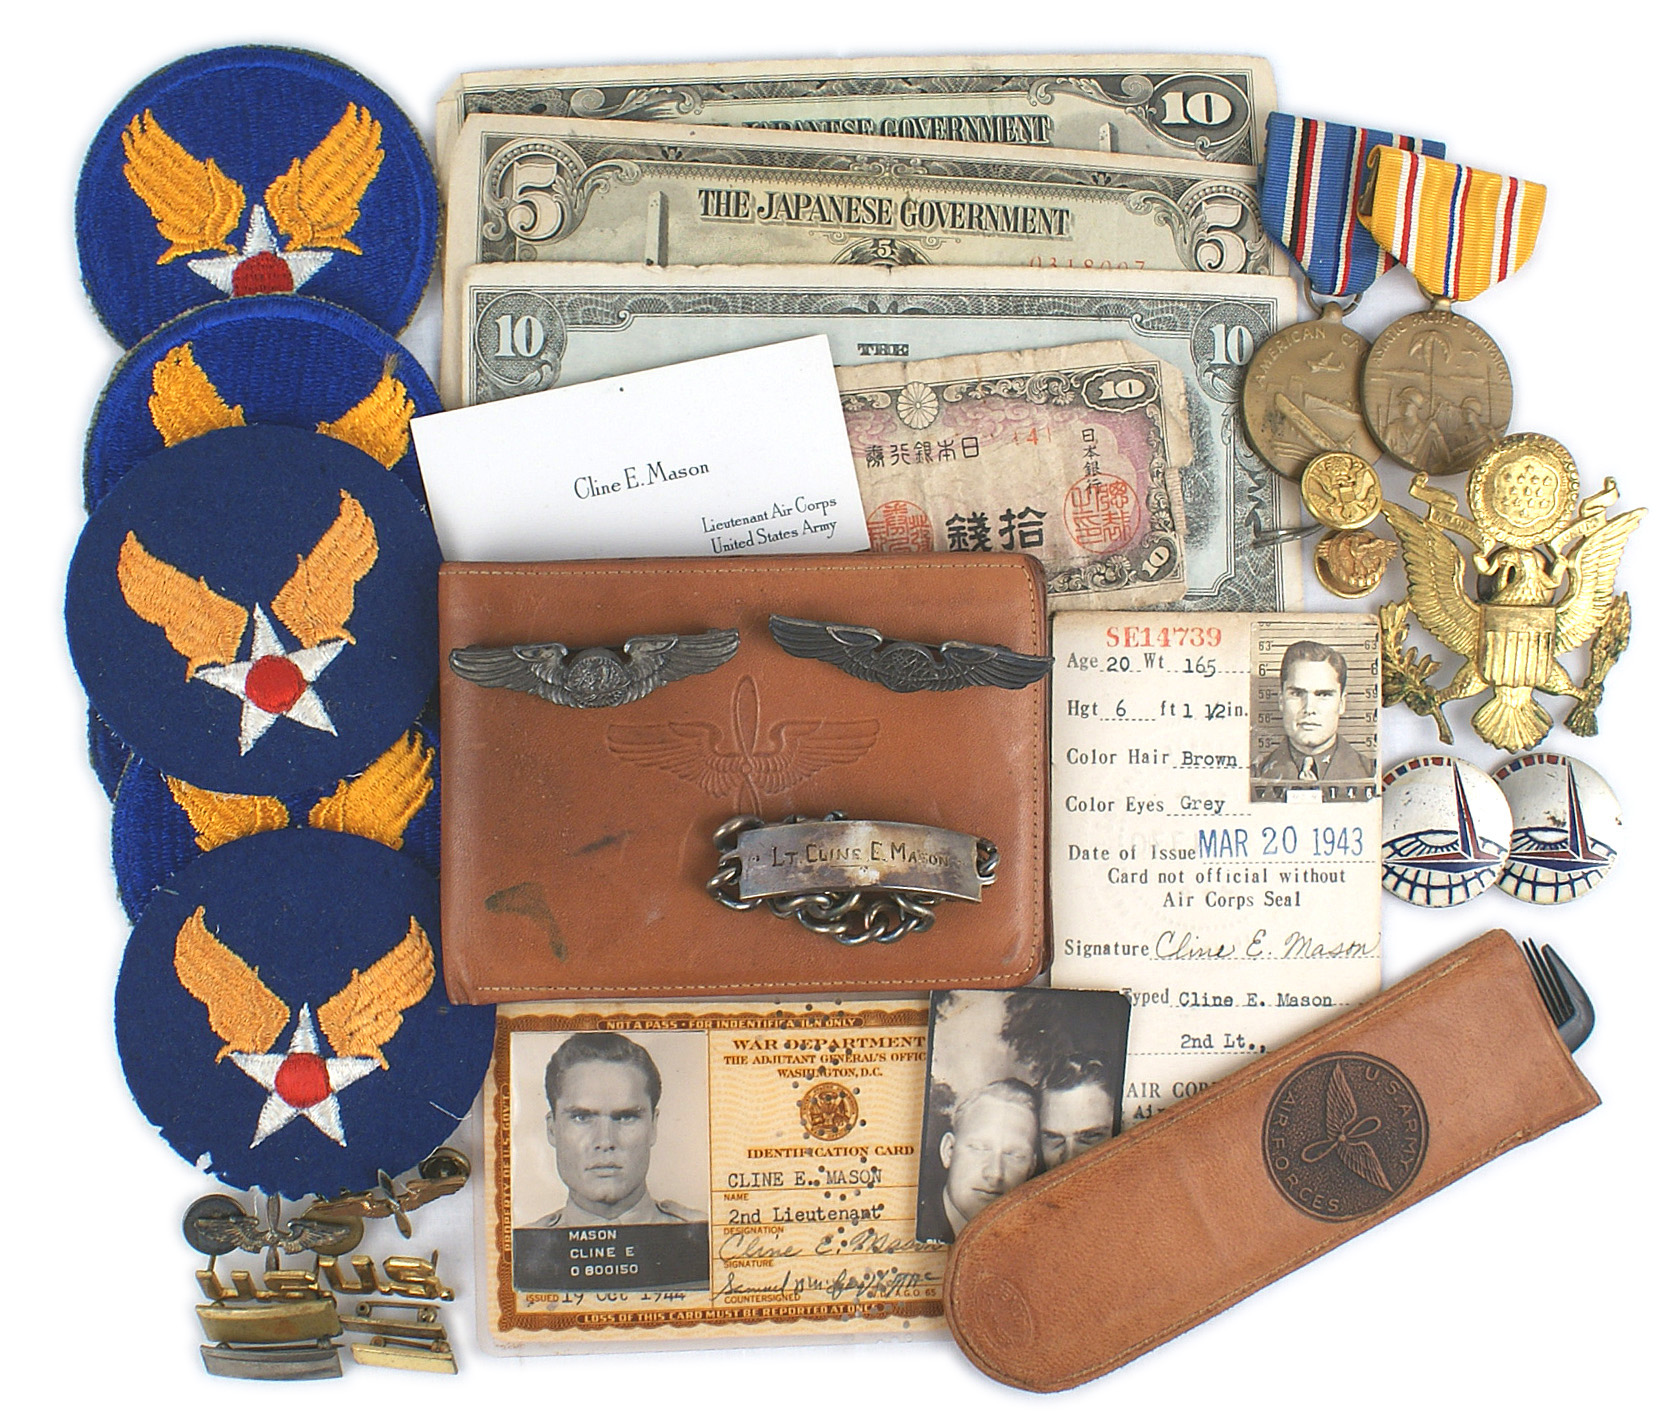 Items pertaining to 1st Lt. Cline E. Mason, who served with the Army Air Force in the China, Burma, India Theater of Operations, include his full uniform and leather jacket (minimum bid: $2,000). Mohawk Arms, Inc. image